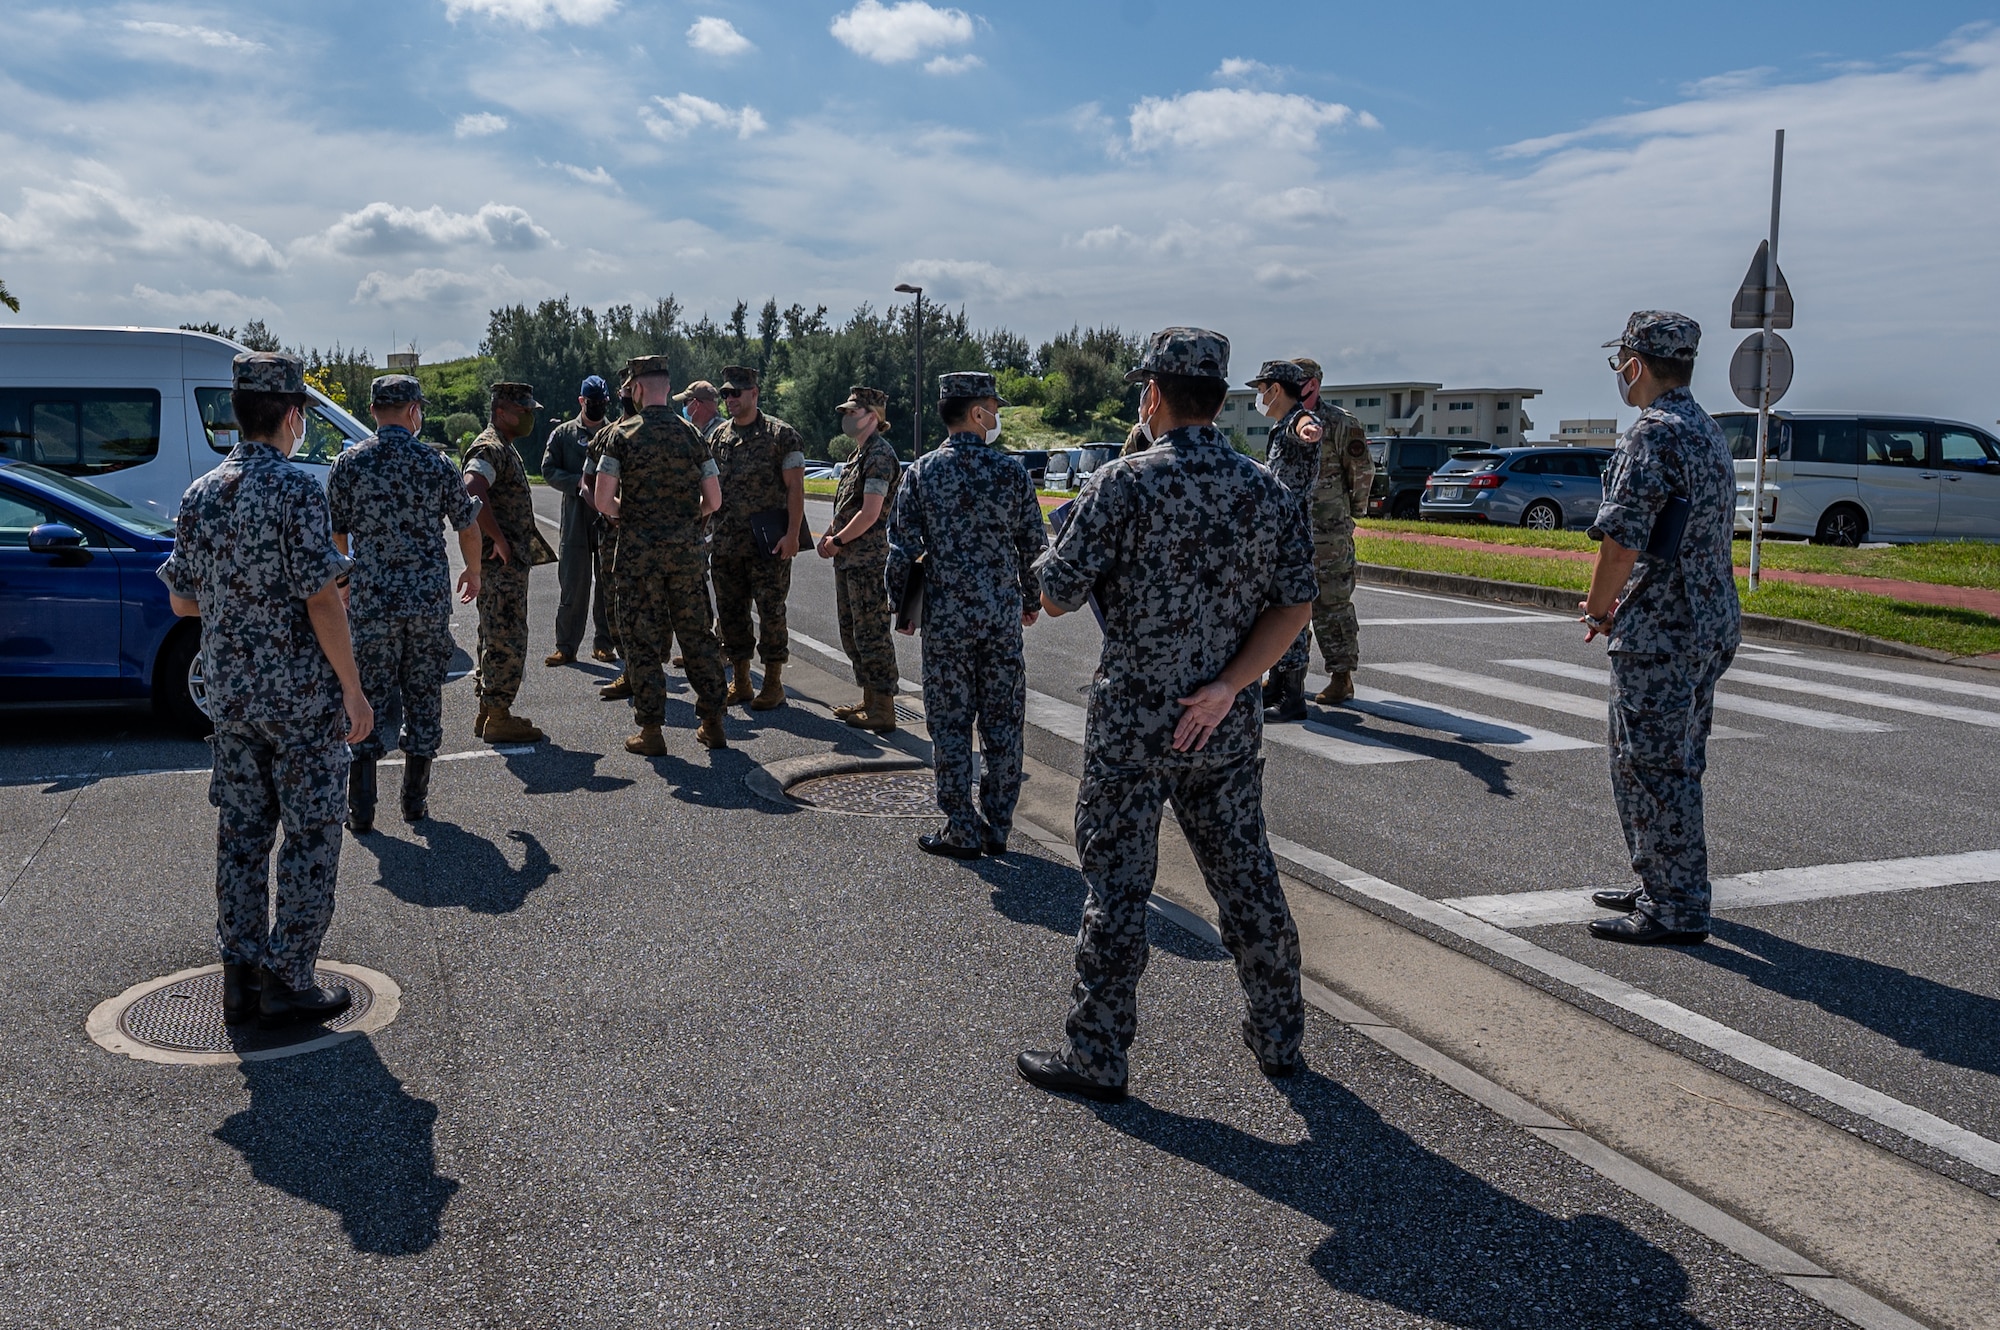 Airmen, Marines, and JASDF personnel talk with each other.